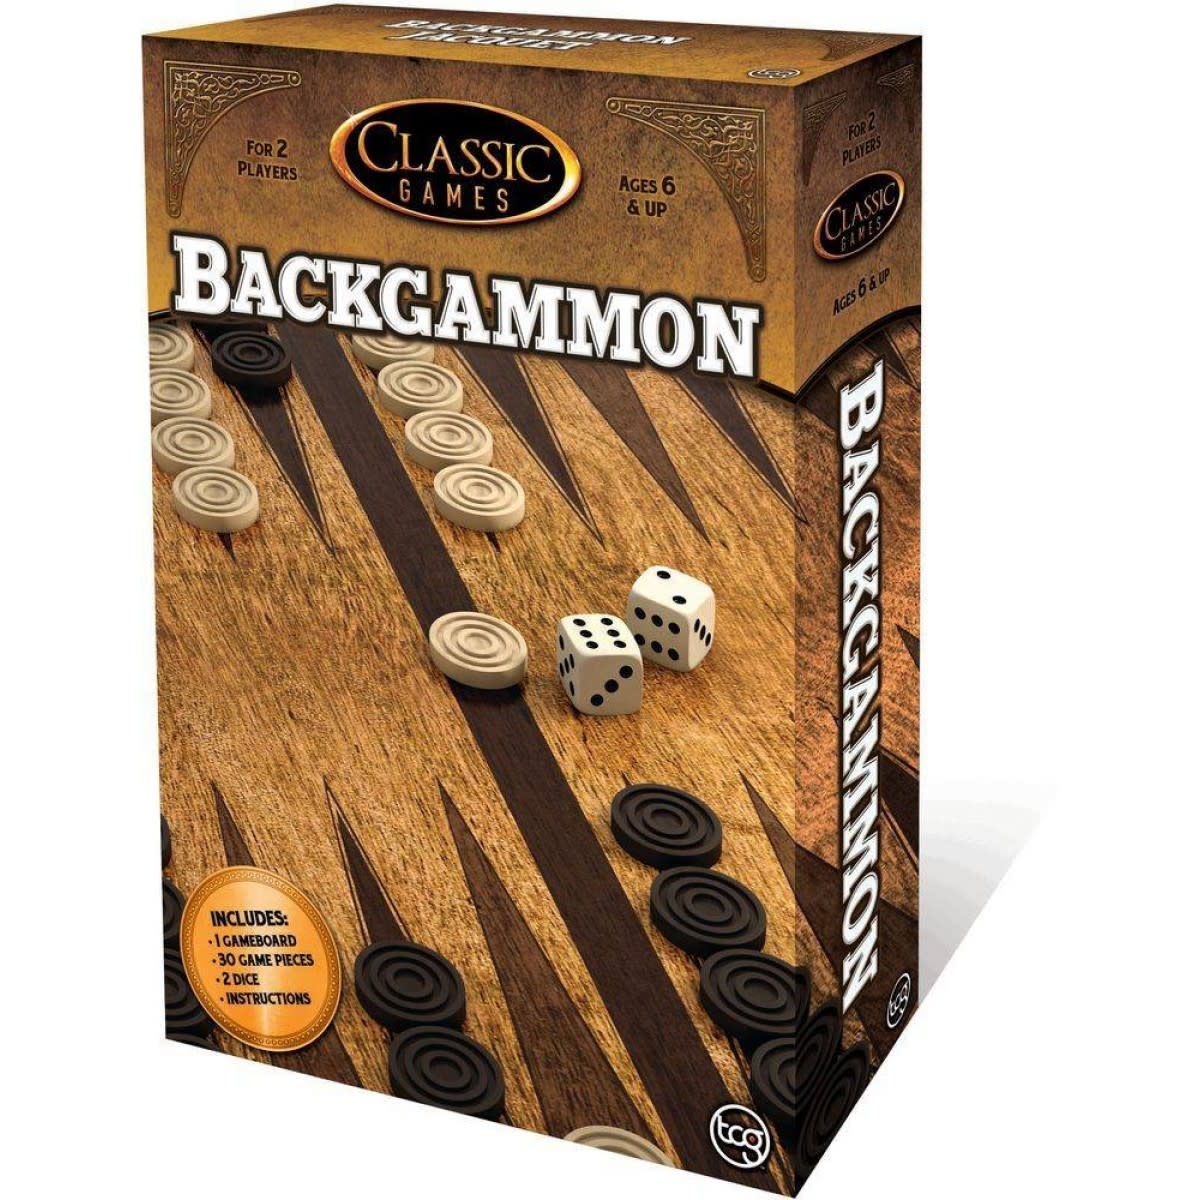 Download CLASSIC GAMES - BACKGAMMON - Apt to Game